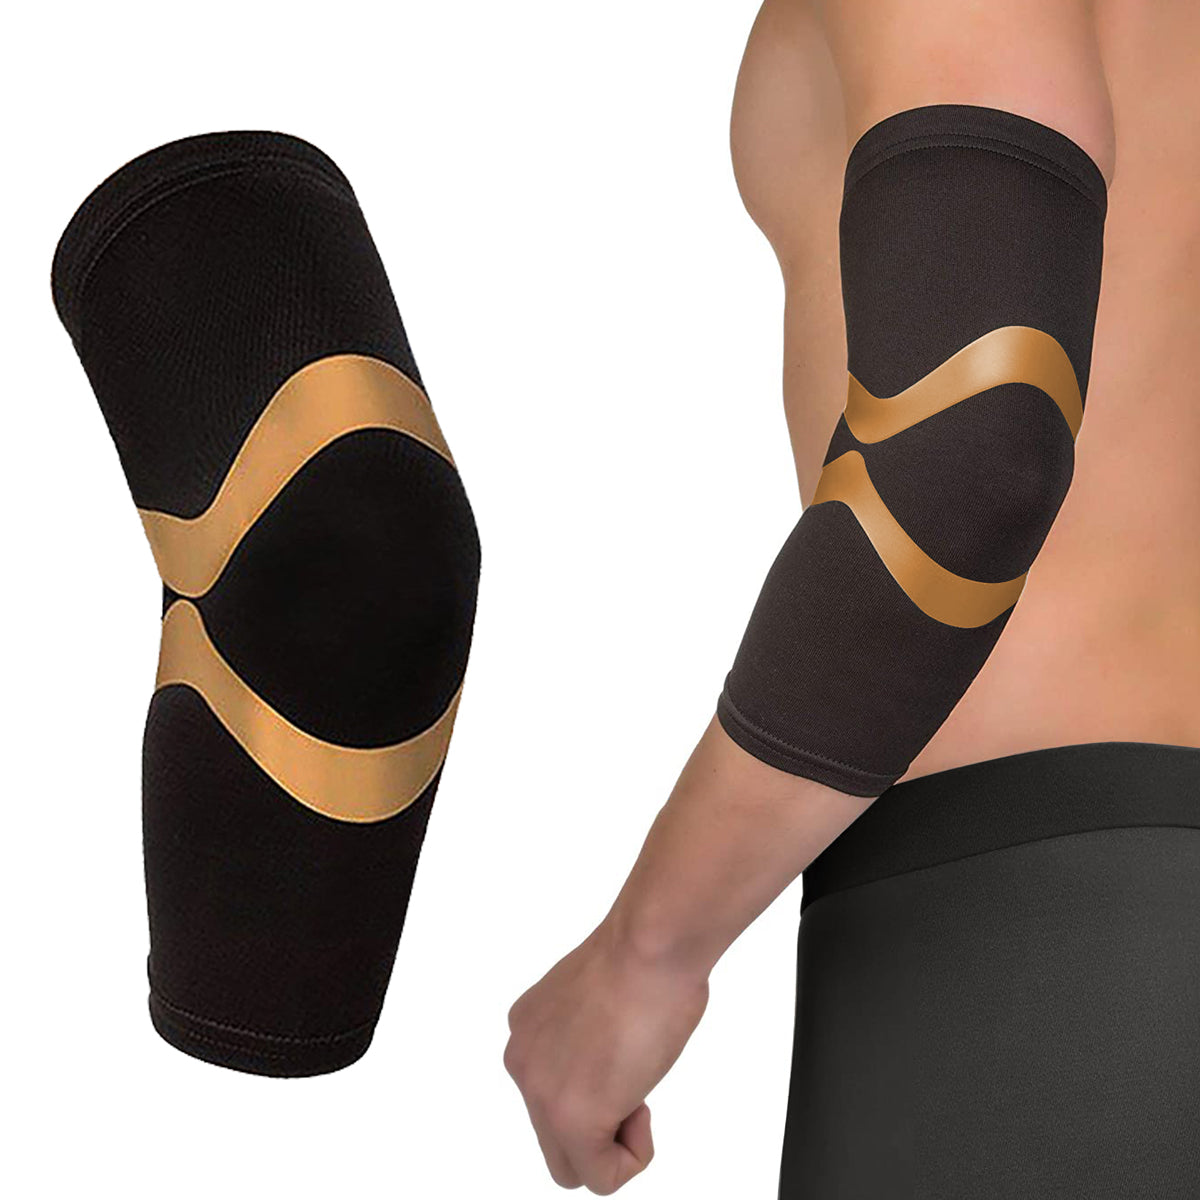 Unisex Copper Compression Elbow Sleeve